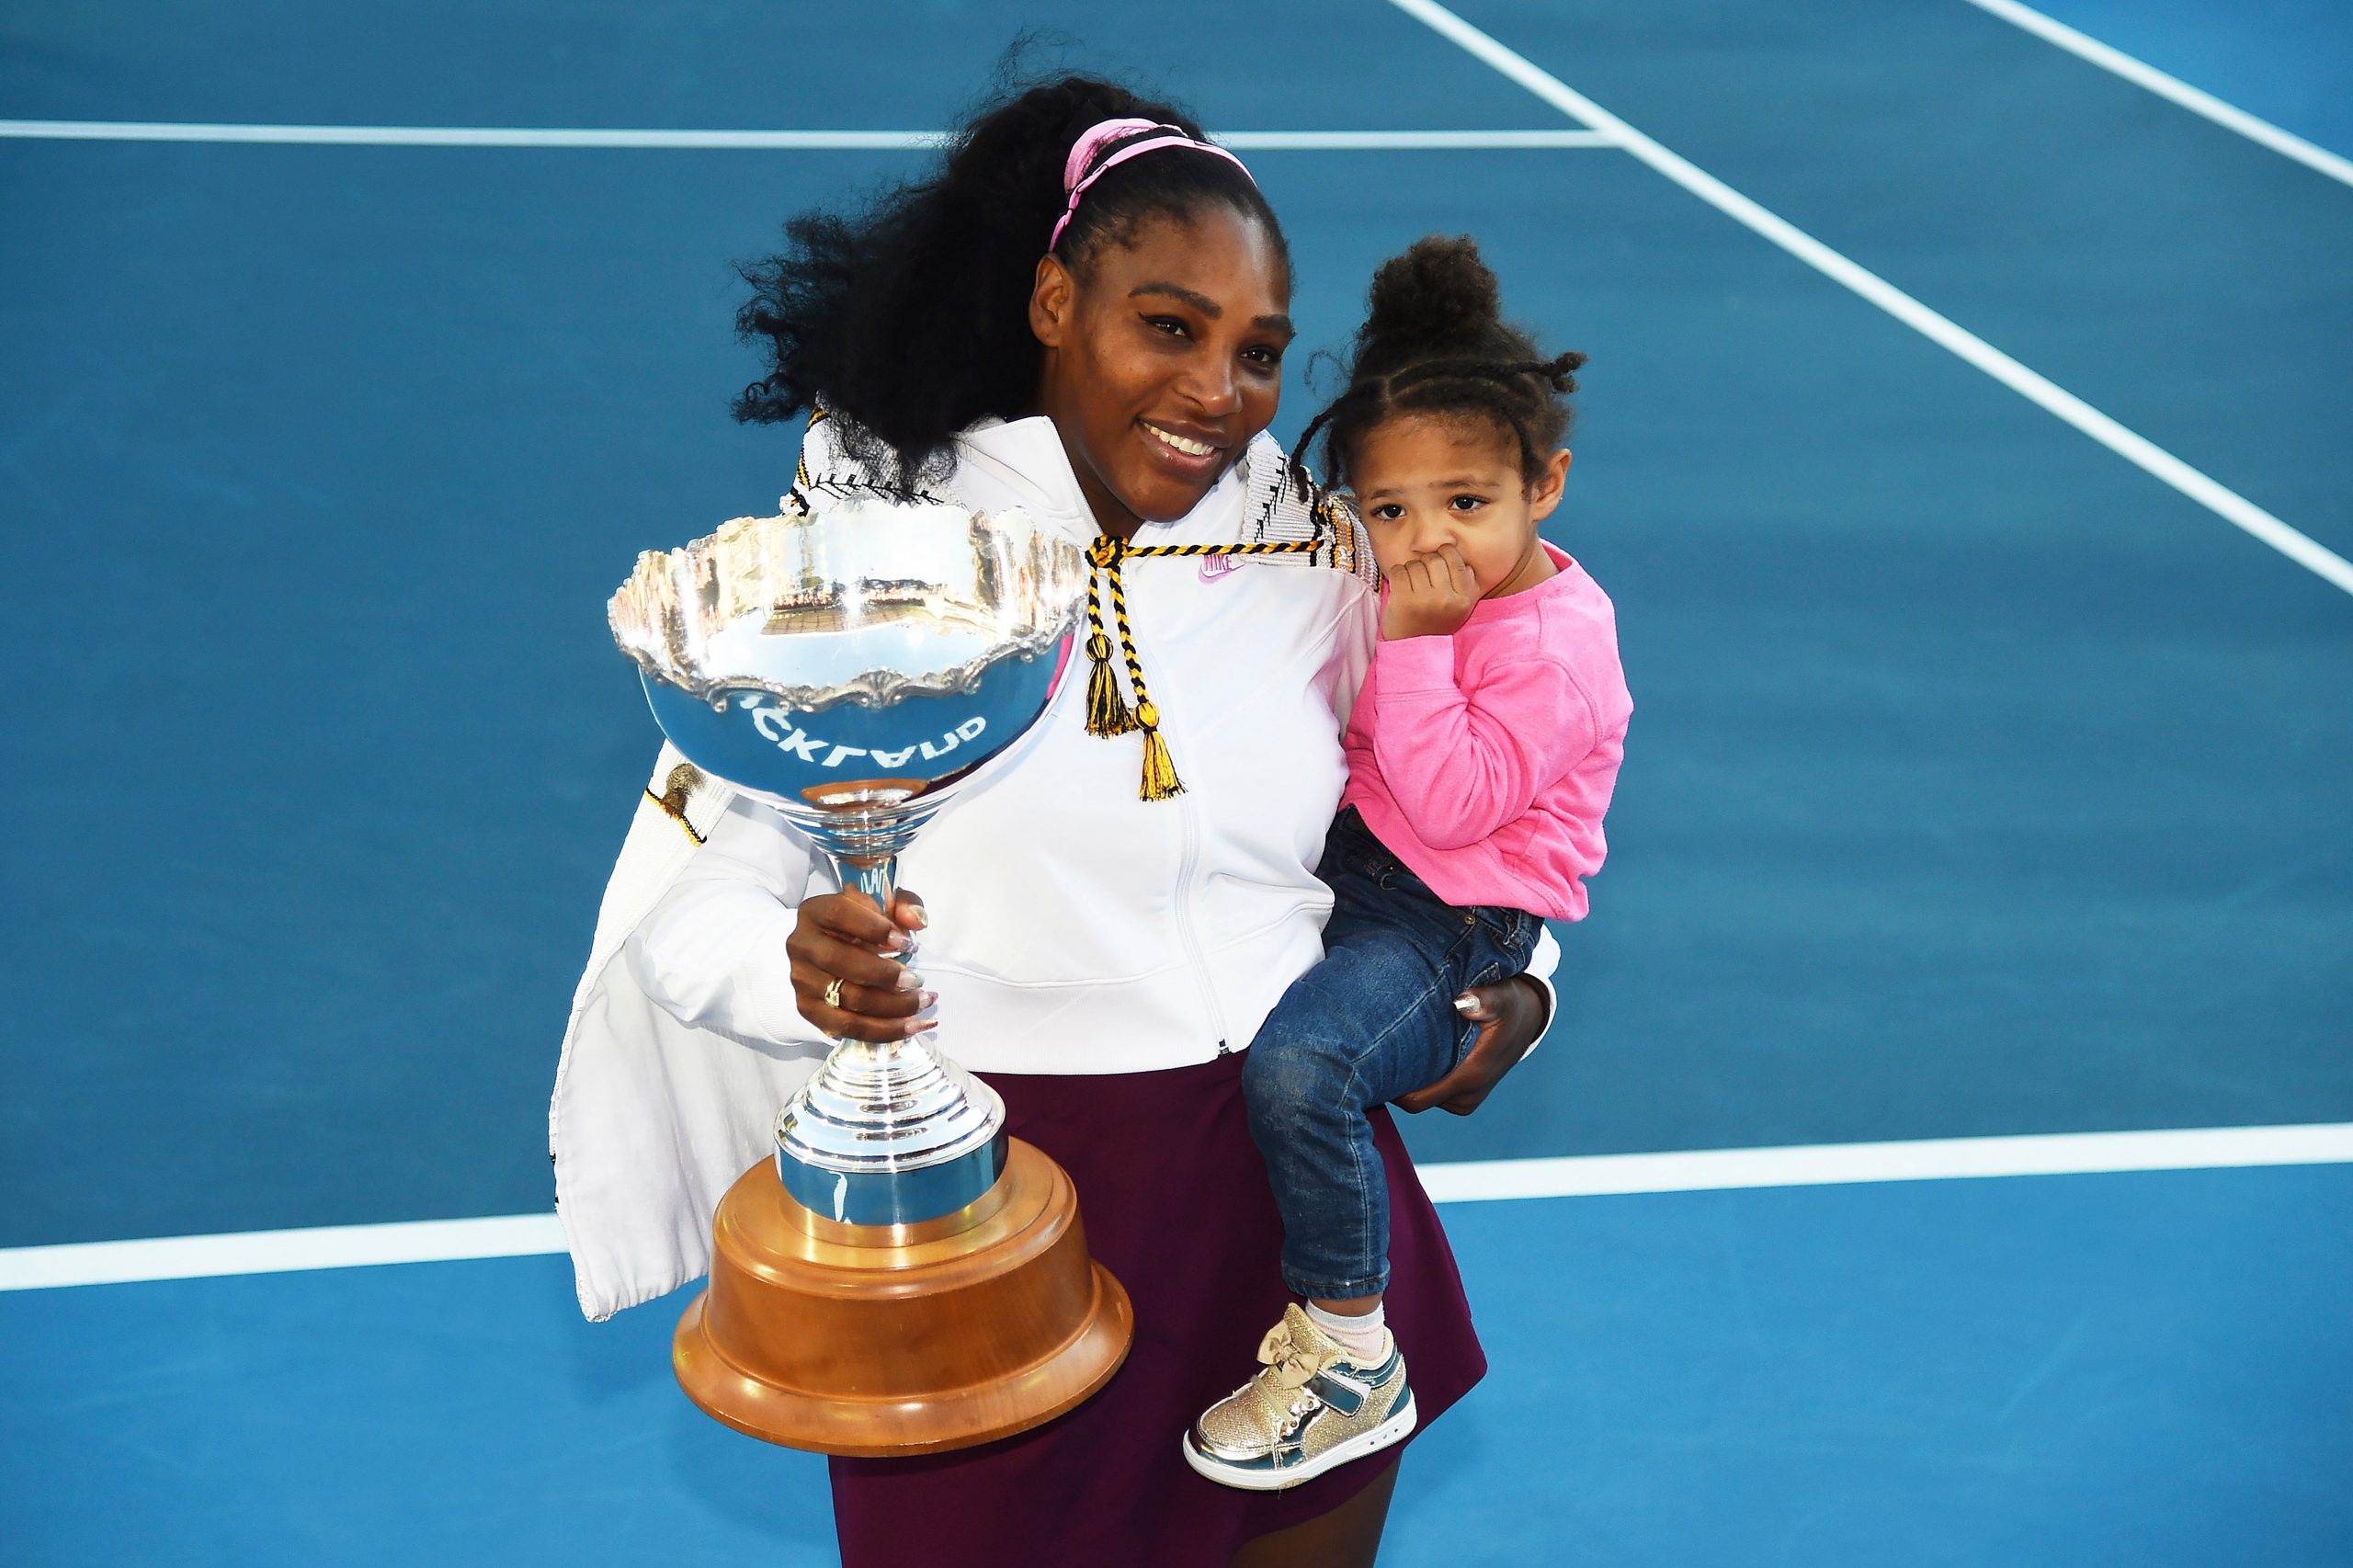 Why Serena Williams is ‘moving on’ from tennis